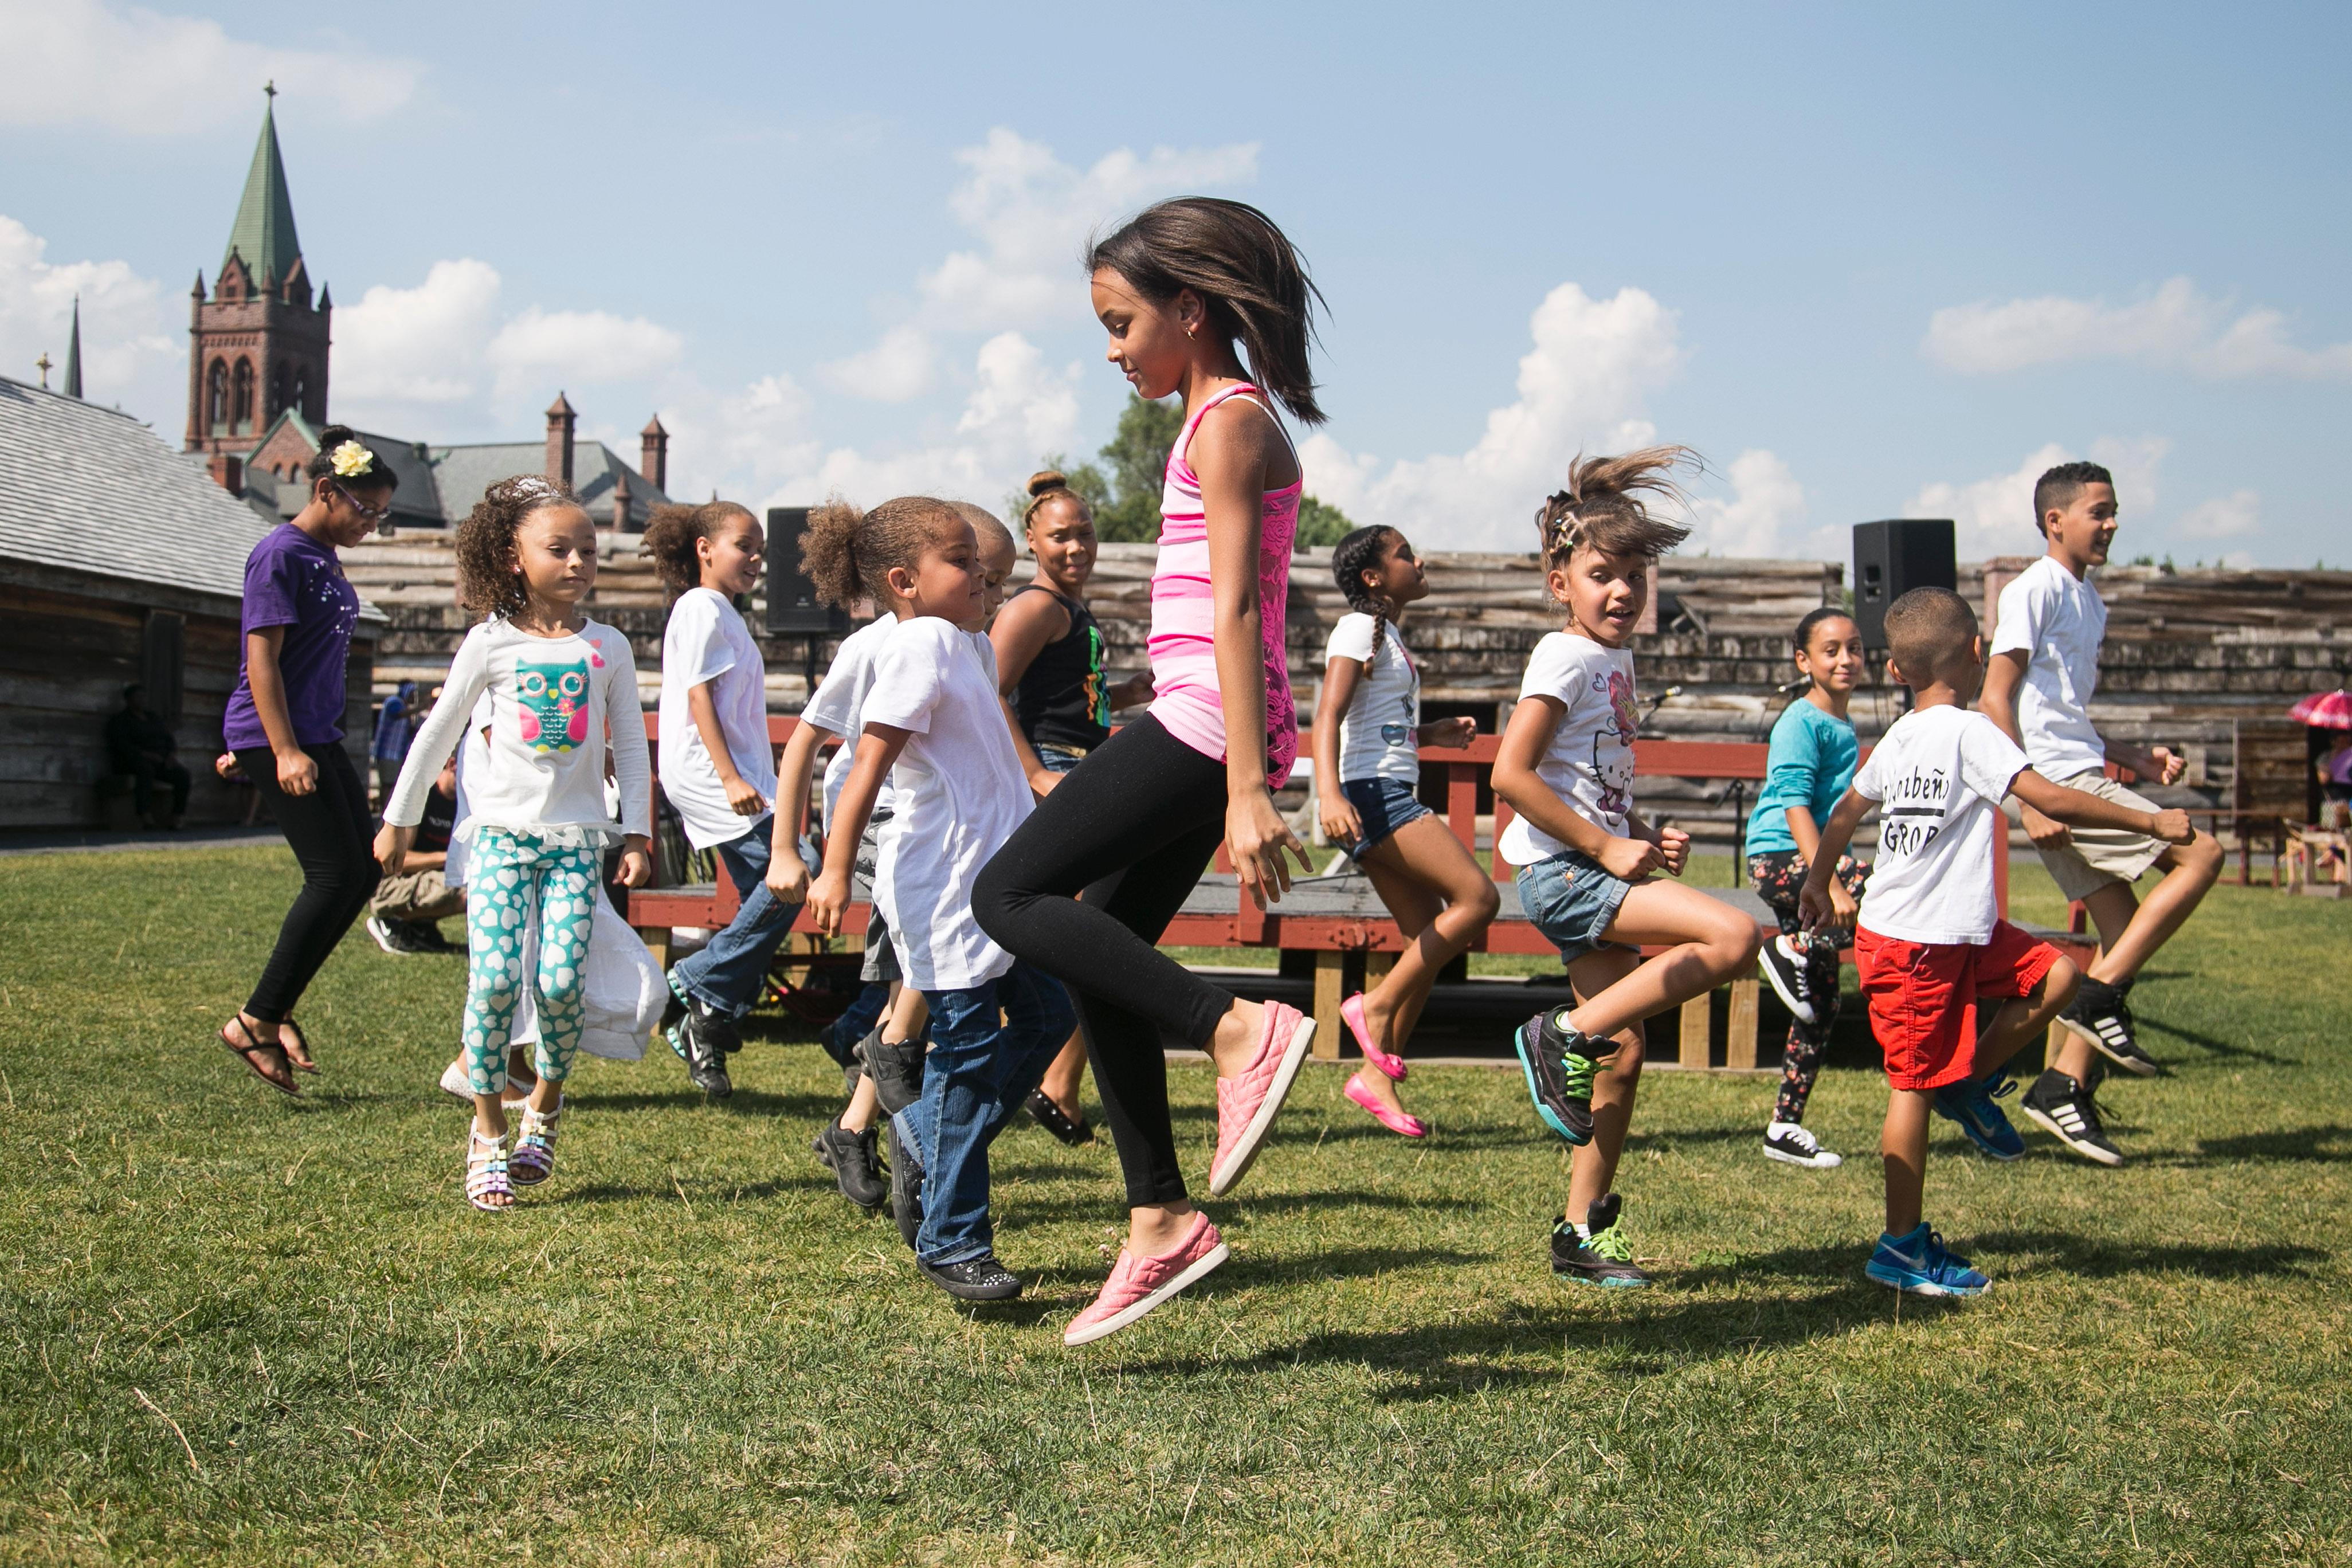 Children dance, jump, and skip on the parade ground of reconstructed Fort Stanwix.